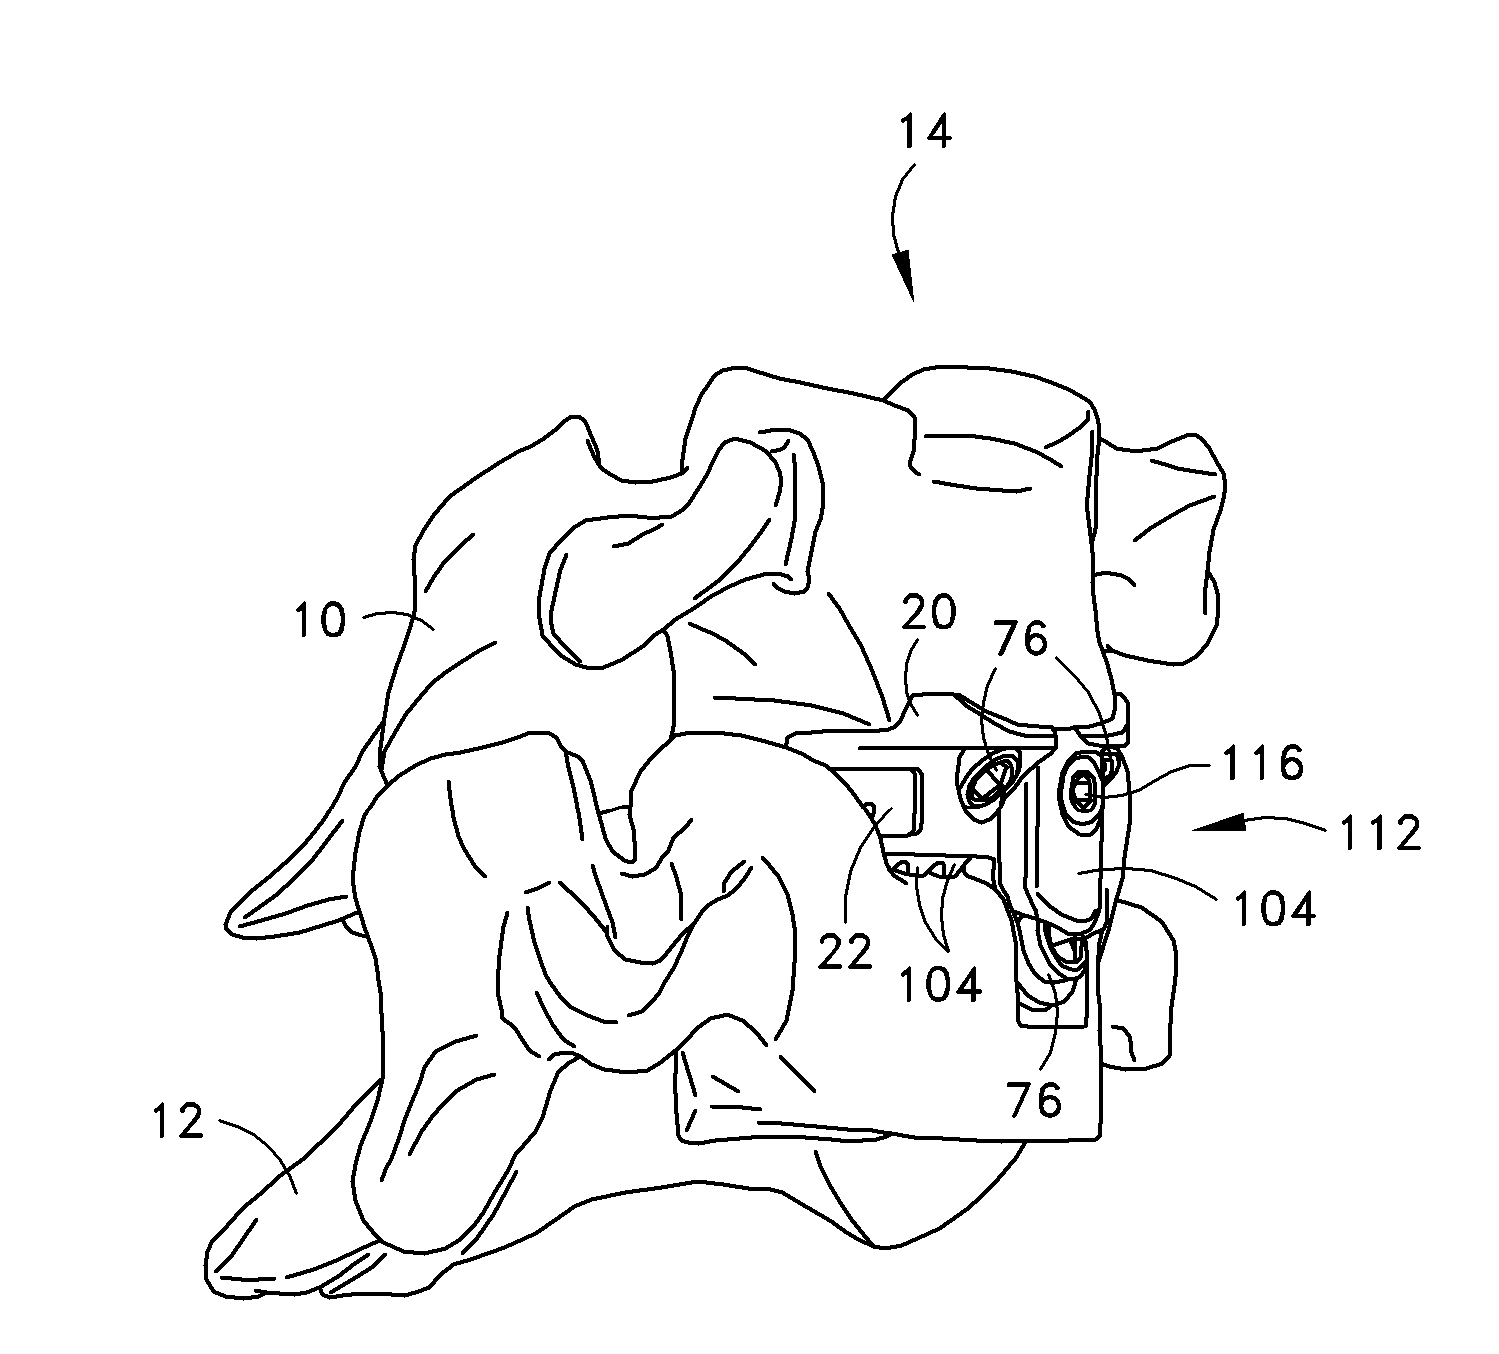 Selective implantation kit and method including tool for spacer and/or controlled subsidence device